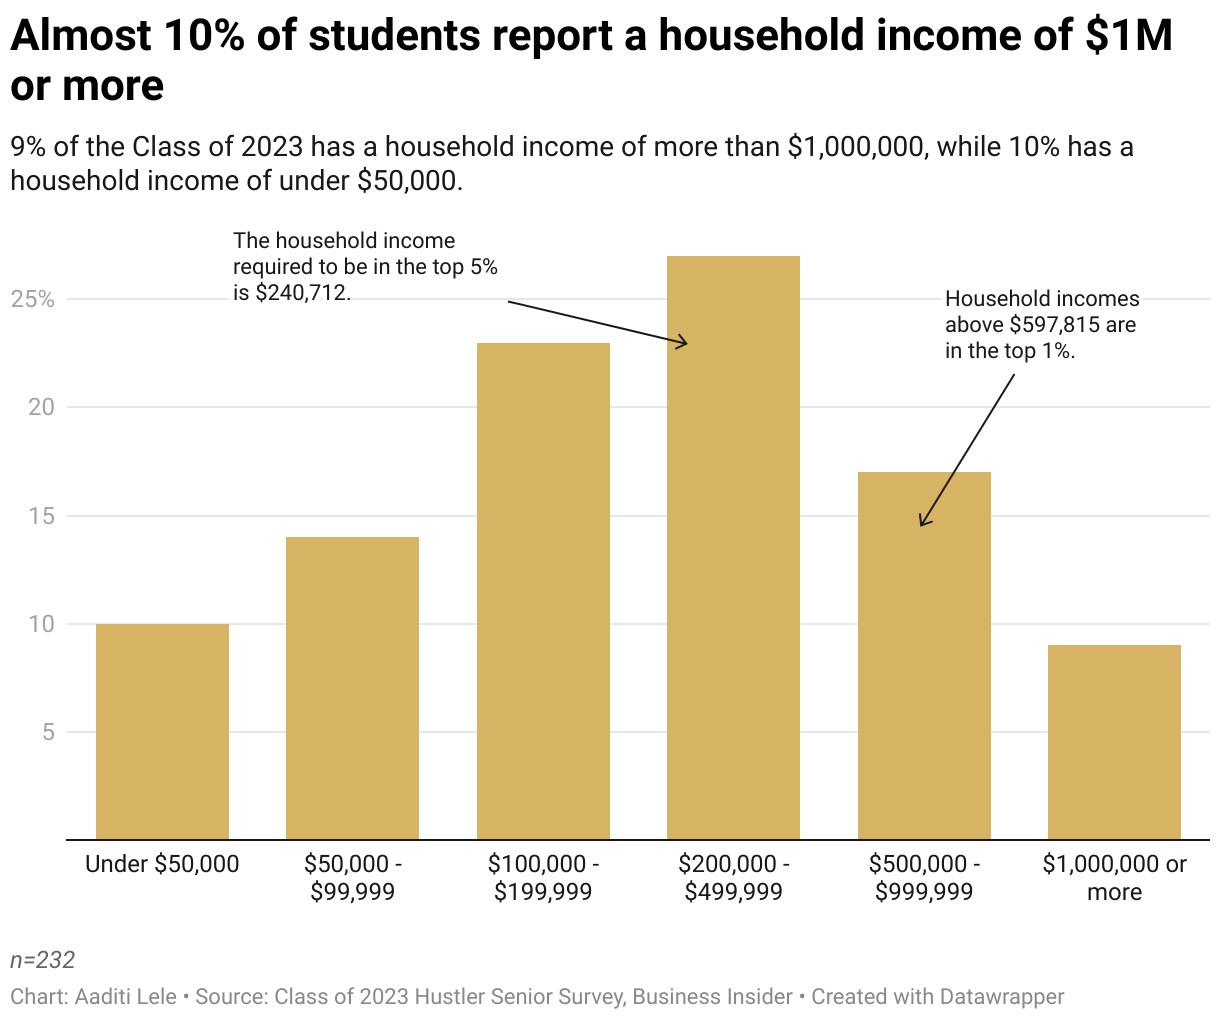 Column chart showing income distribution of household incomes for the Class of 2023. 